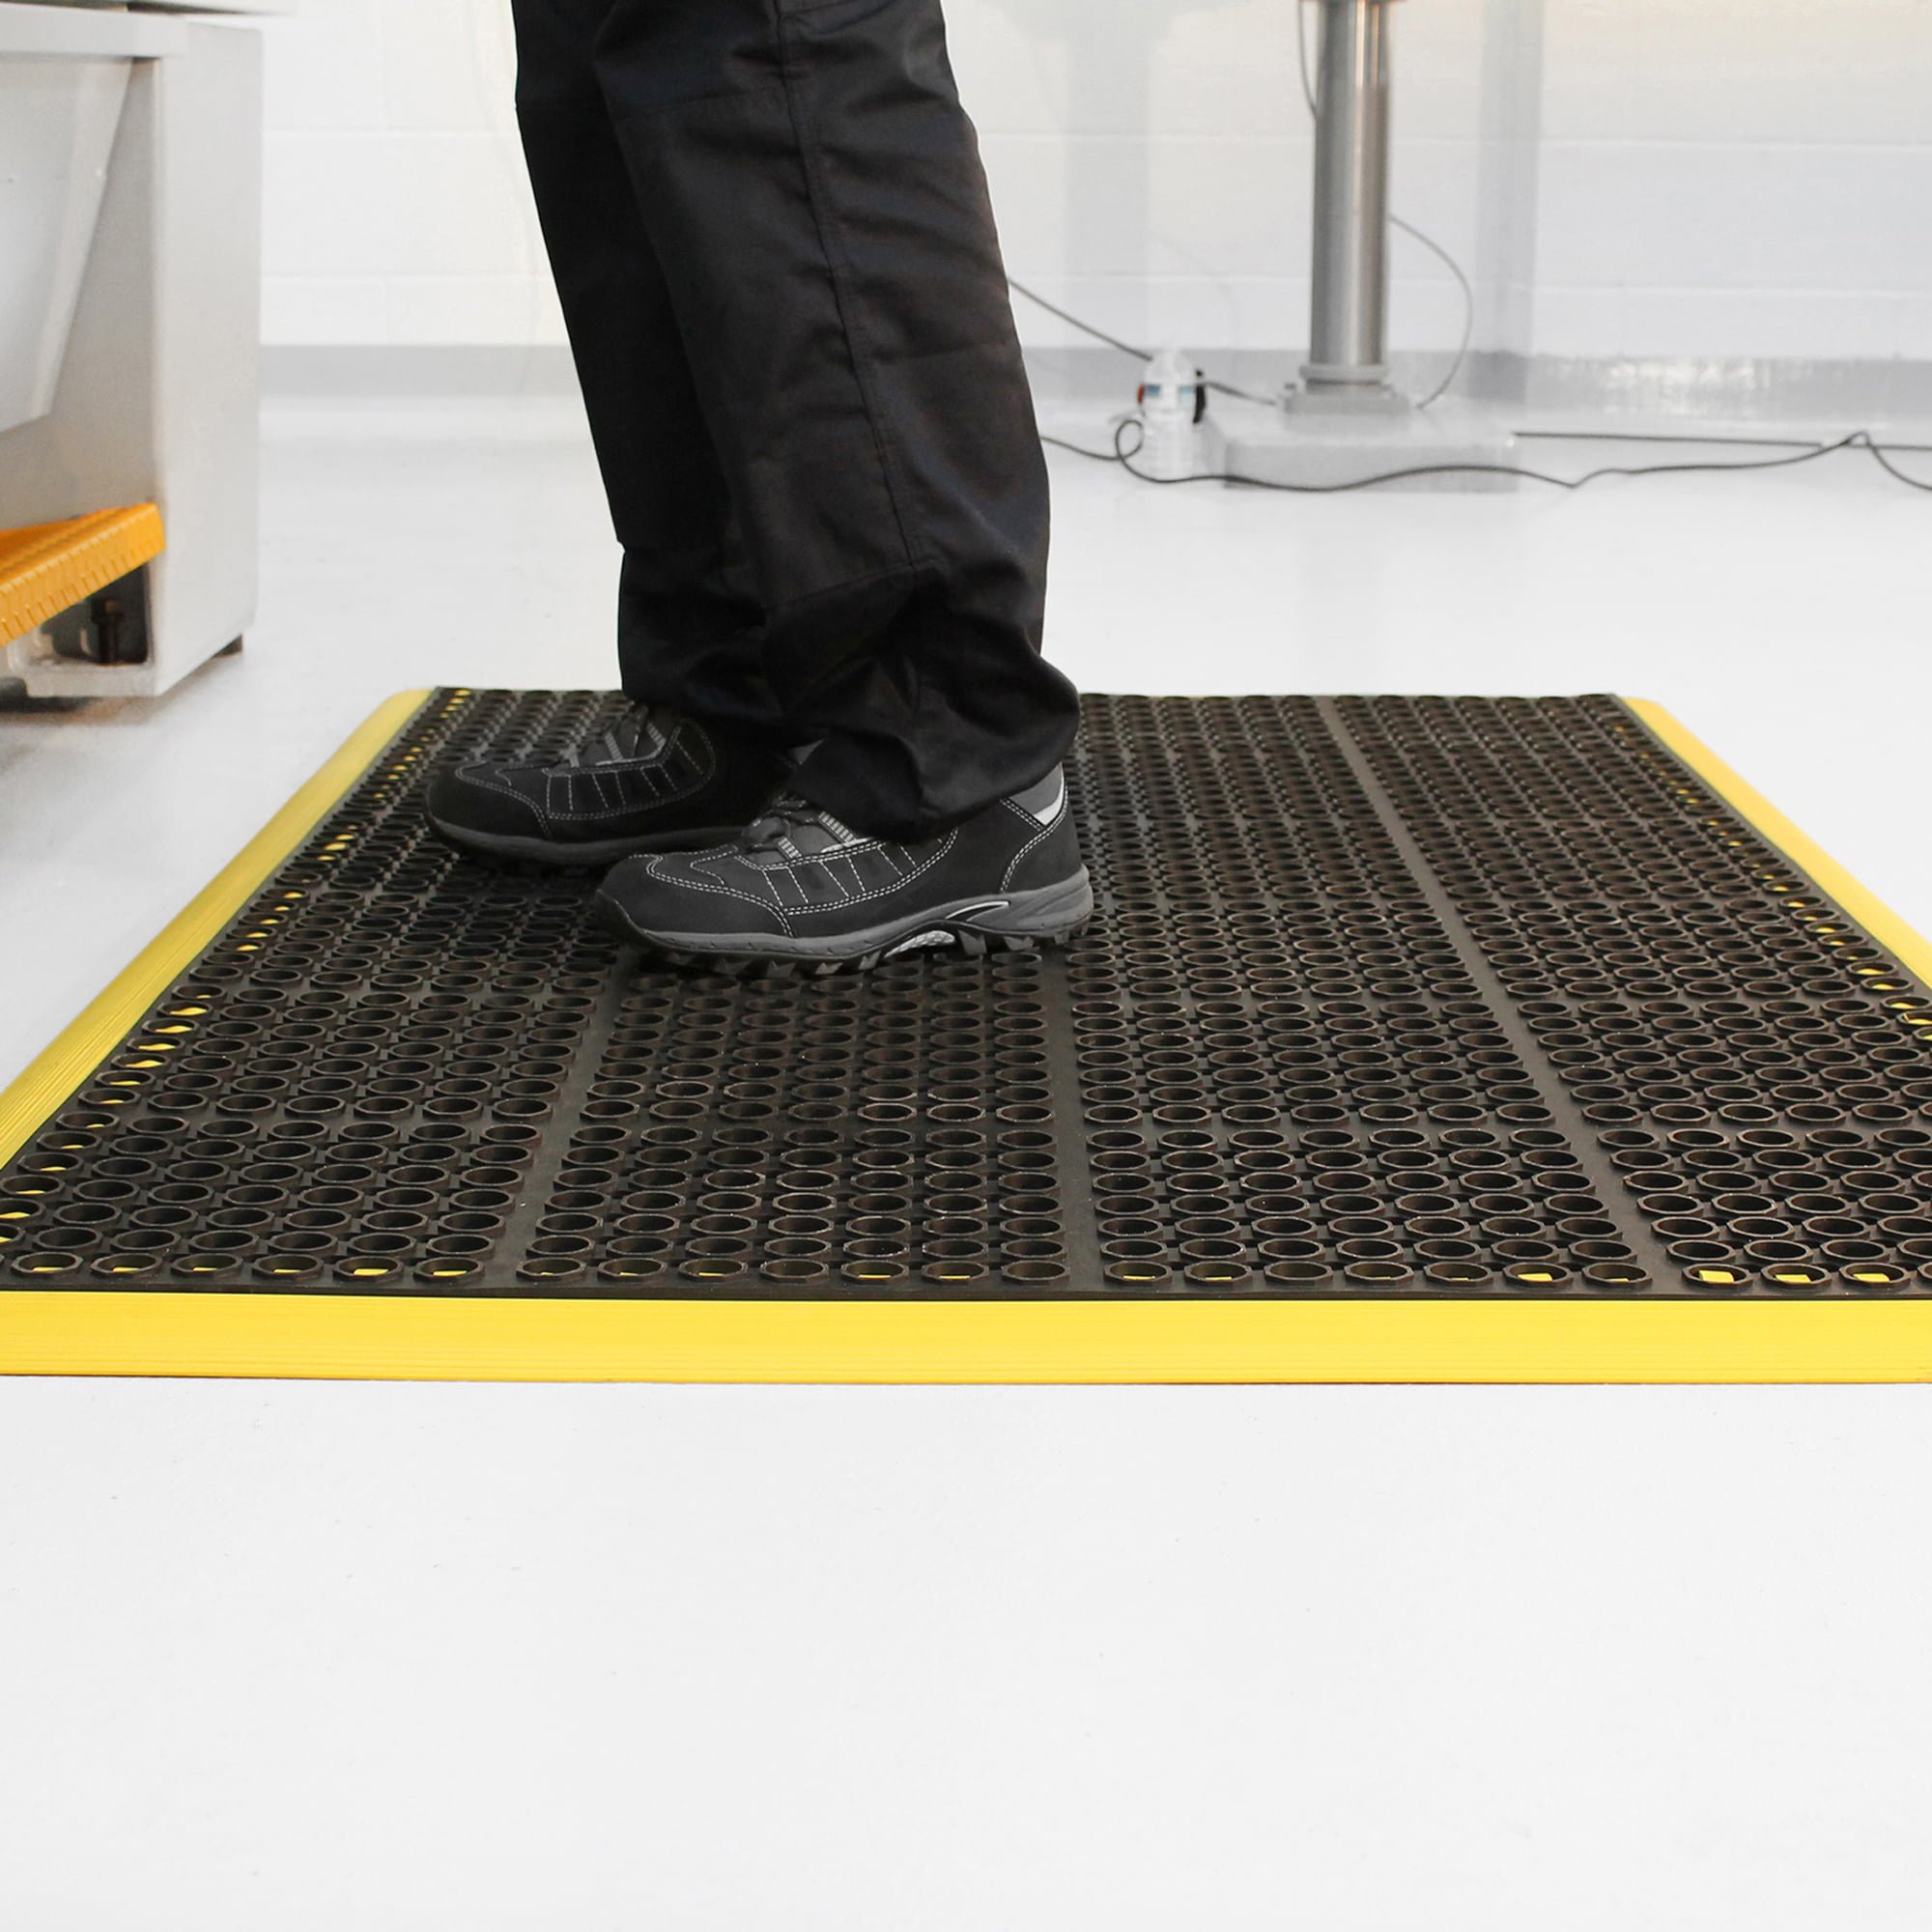 A Guide for Prolonged Standing at Work: Anti-Fatigue Mats